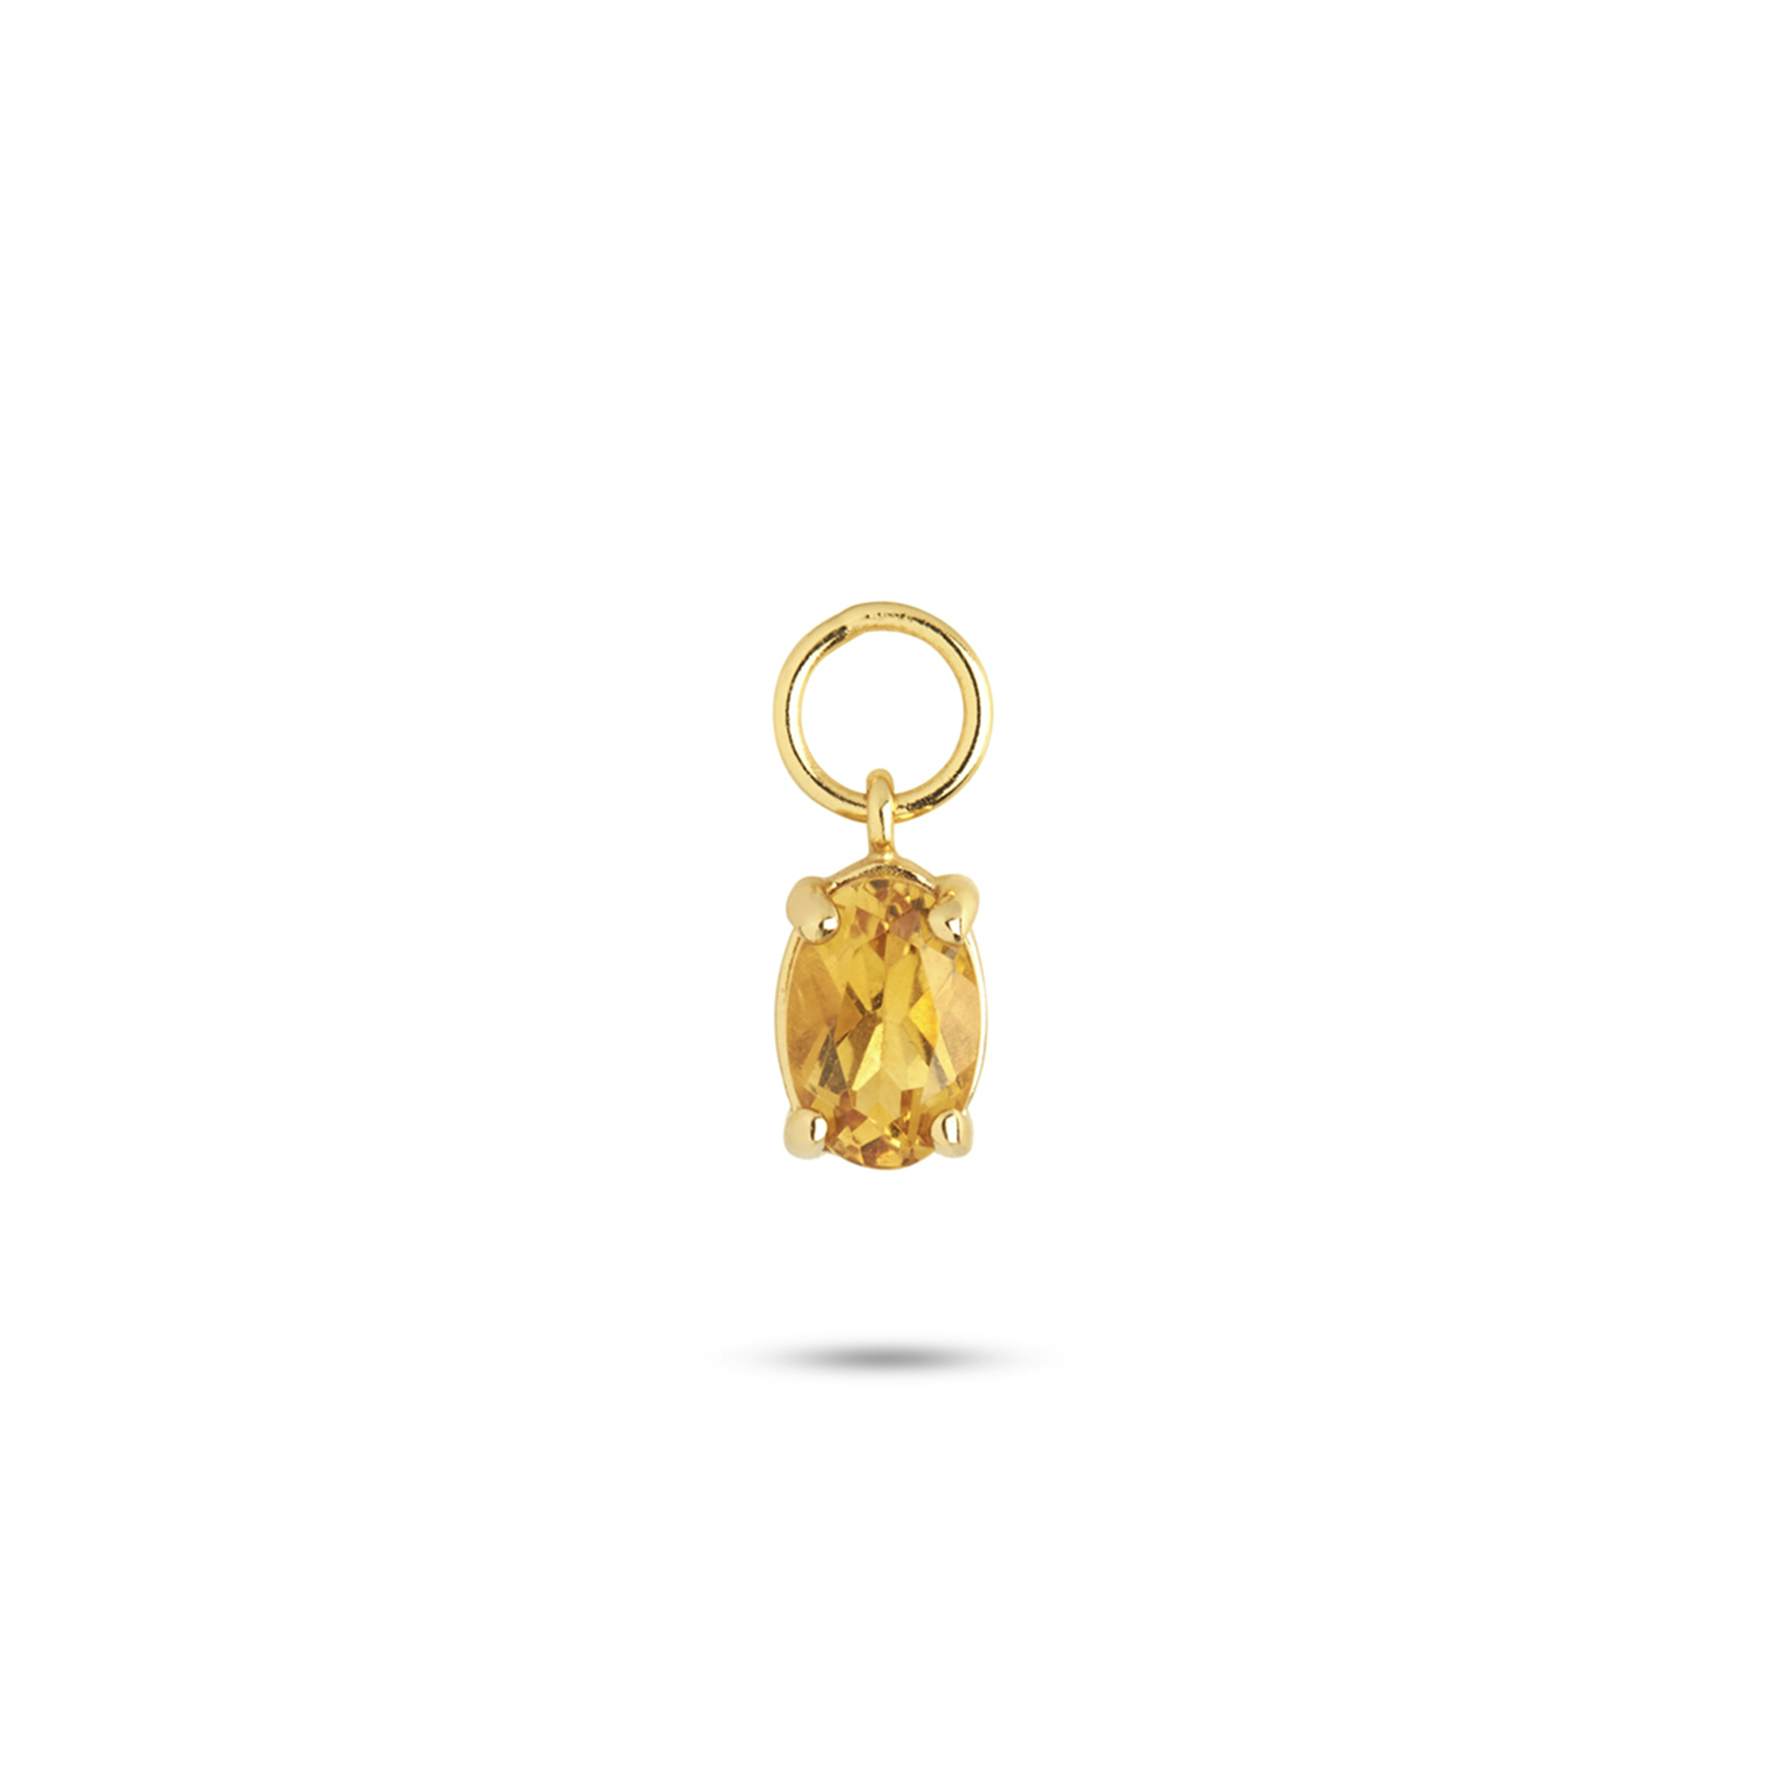 Gem Candy Pendant Happiness from Carré in Goldplated-Silver Sterling 925